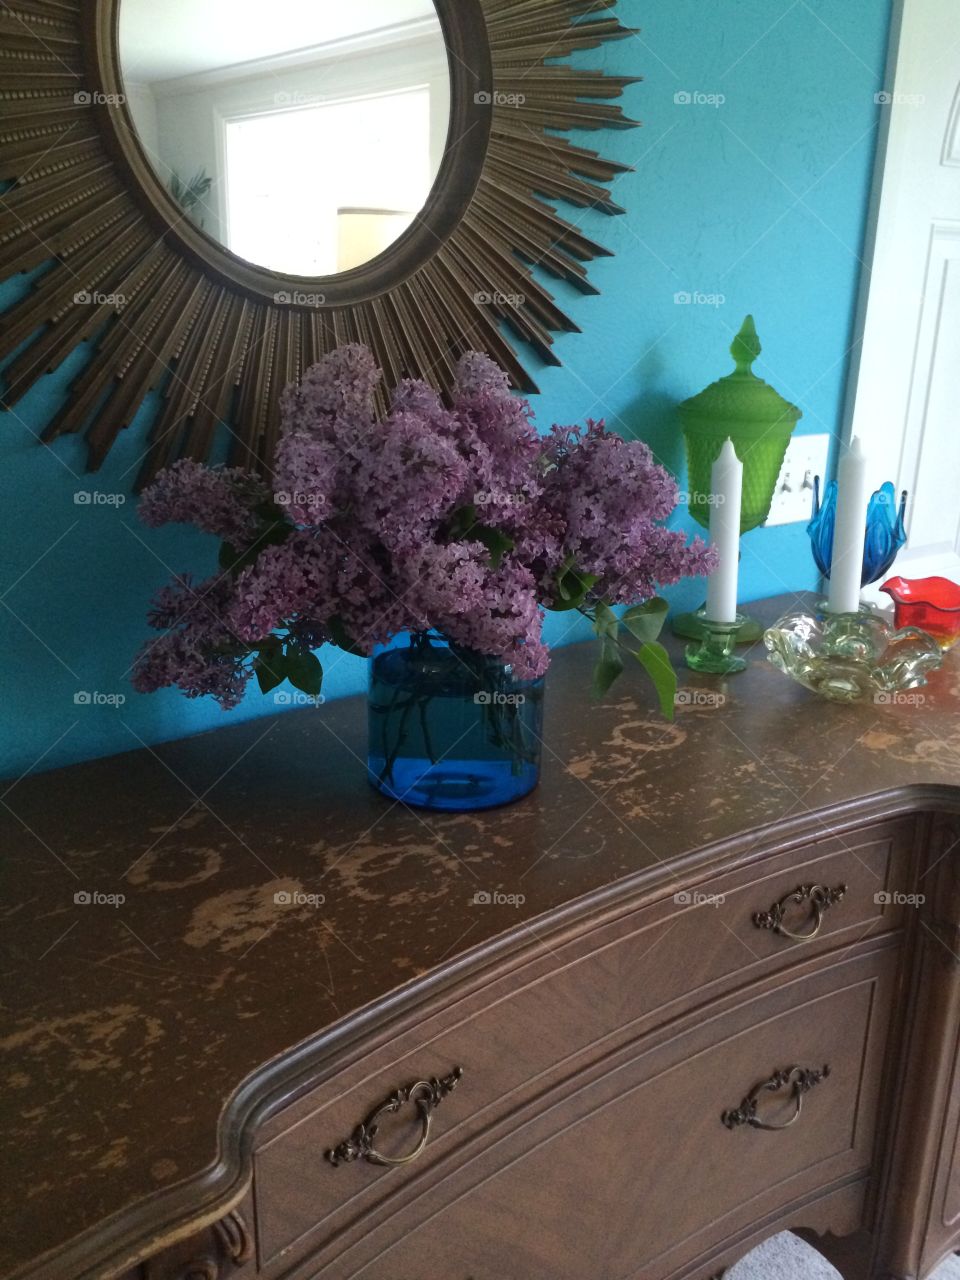 Entry flowers. Lilacs on table